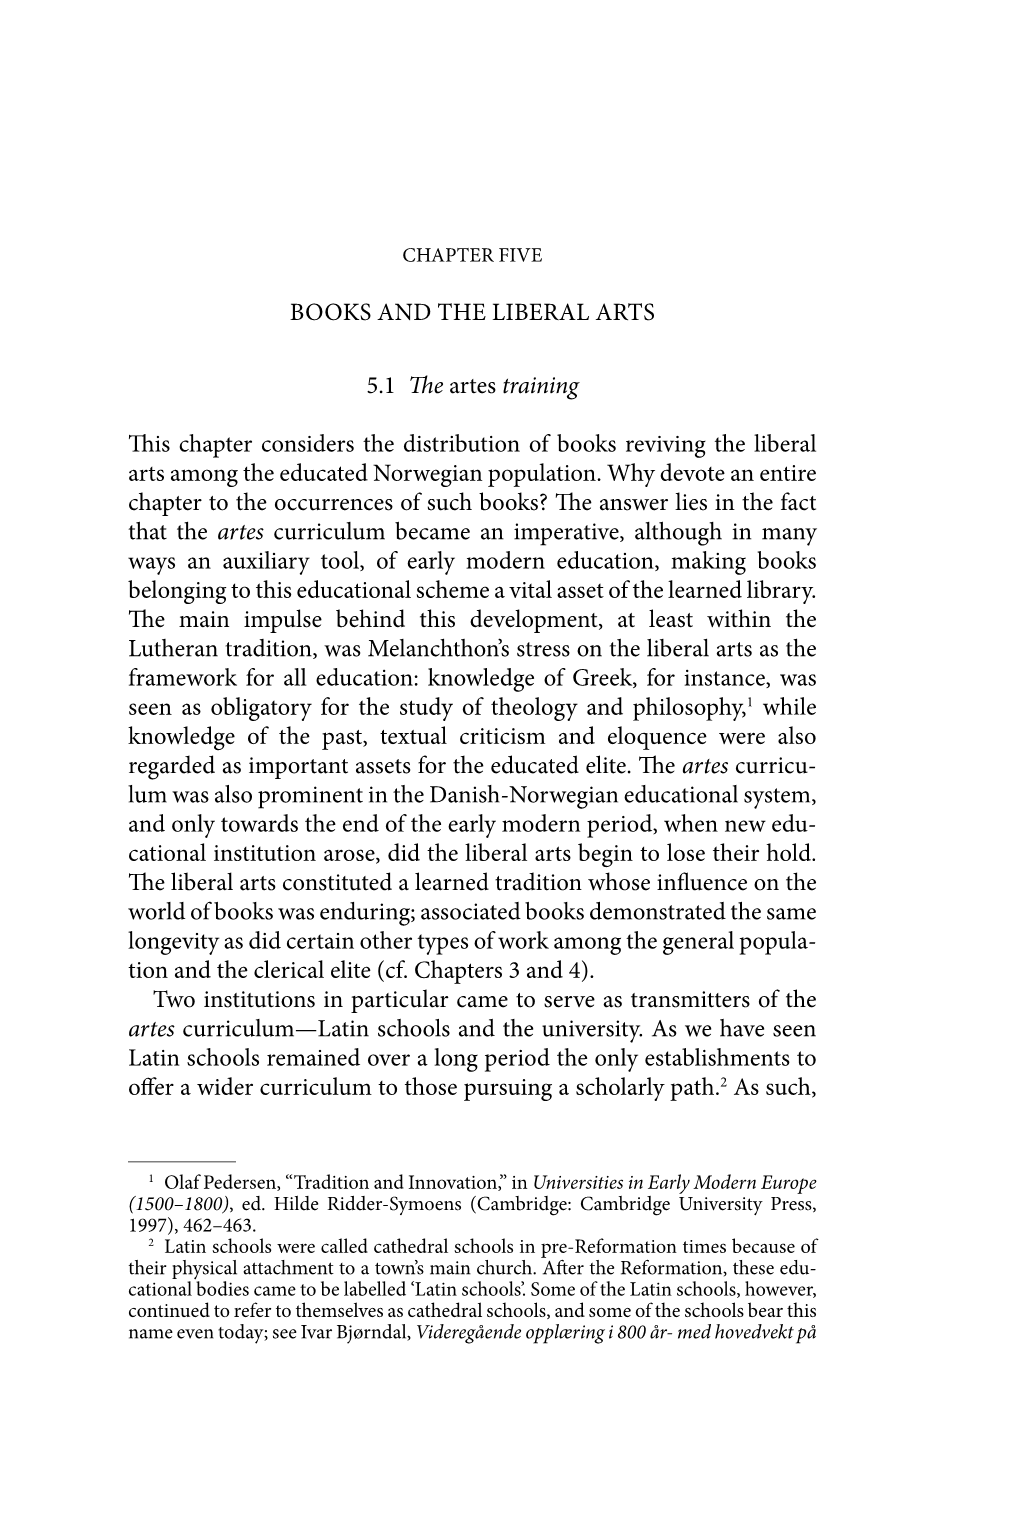 BOOKS and the LIBERAL ARTS 5.1 E Artes Training Is Chapter Considers